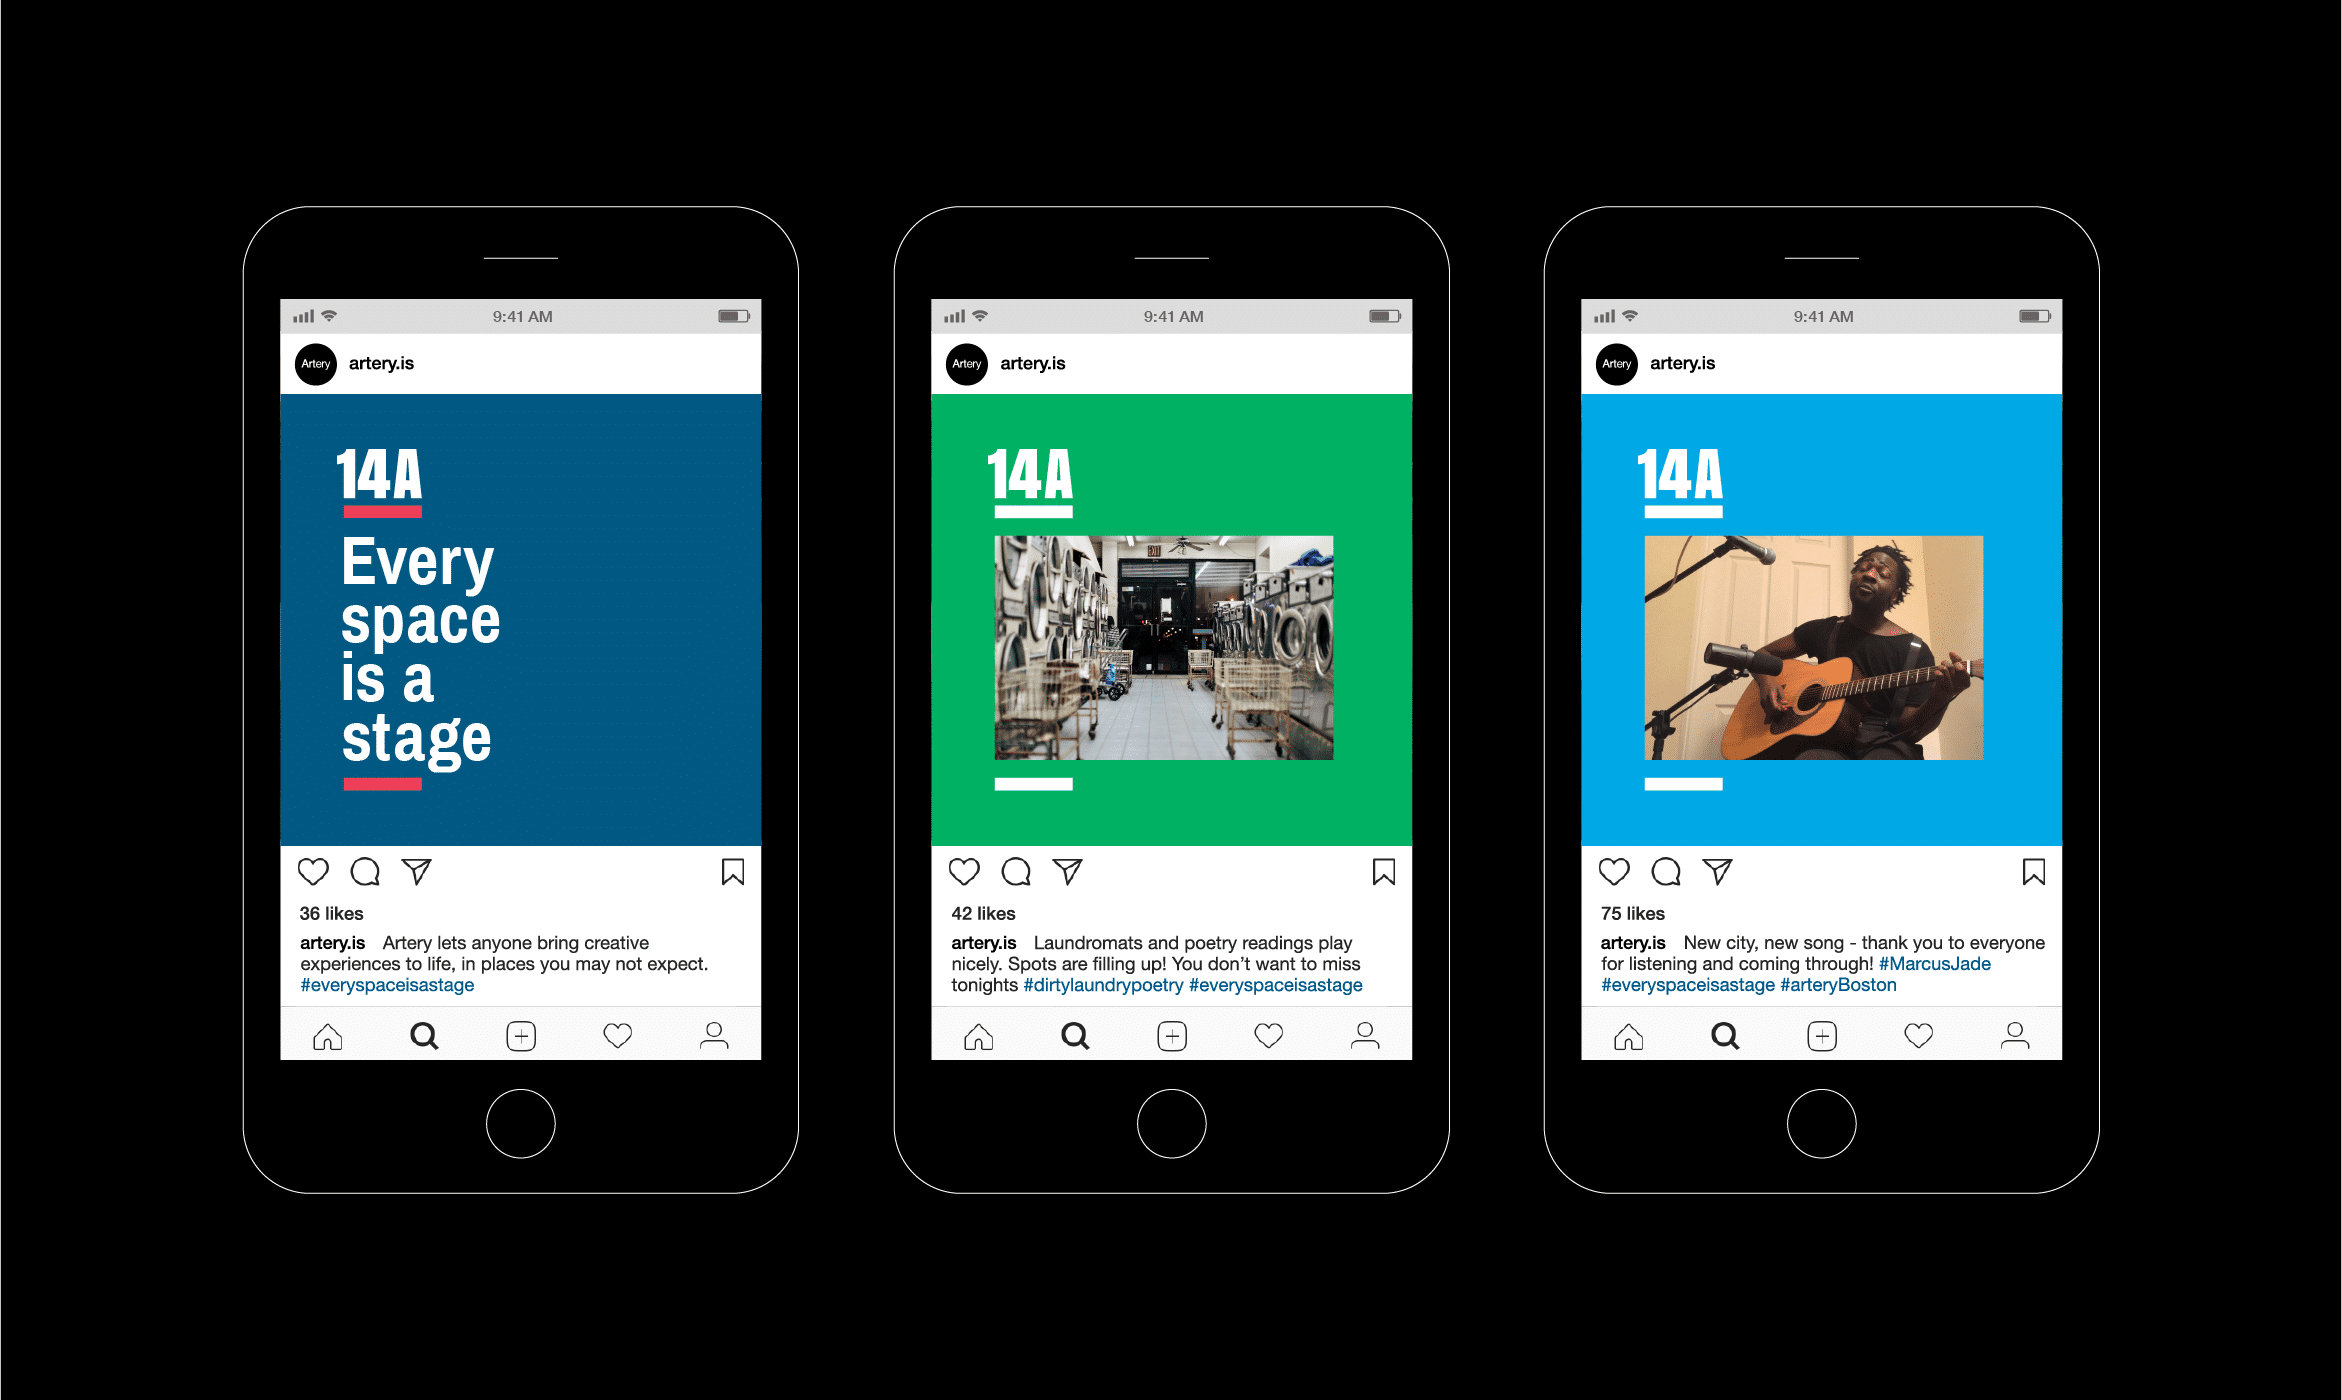 Three mobile phone screens each showing a different Instagram social media post to highlight the messaging and dynamic 14A visual identity as a space for hosts and performers.